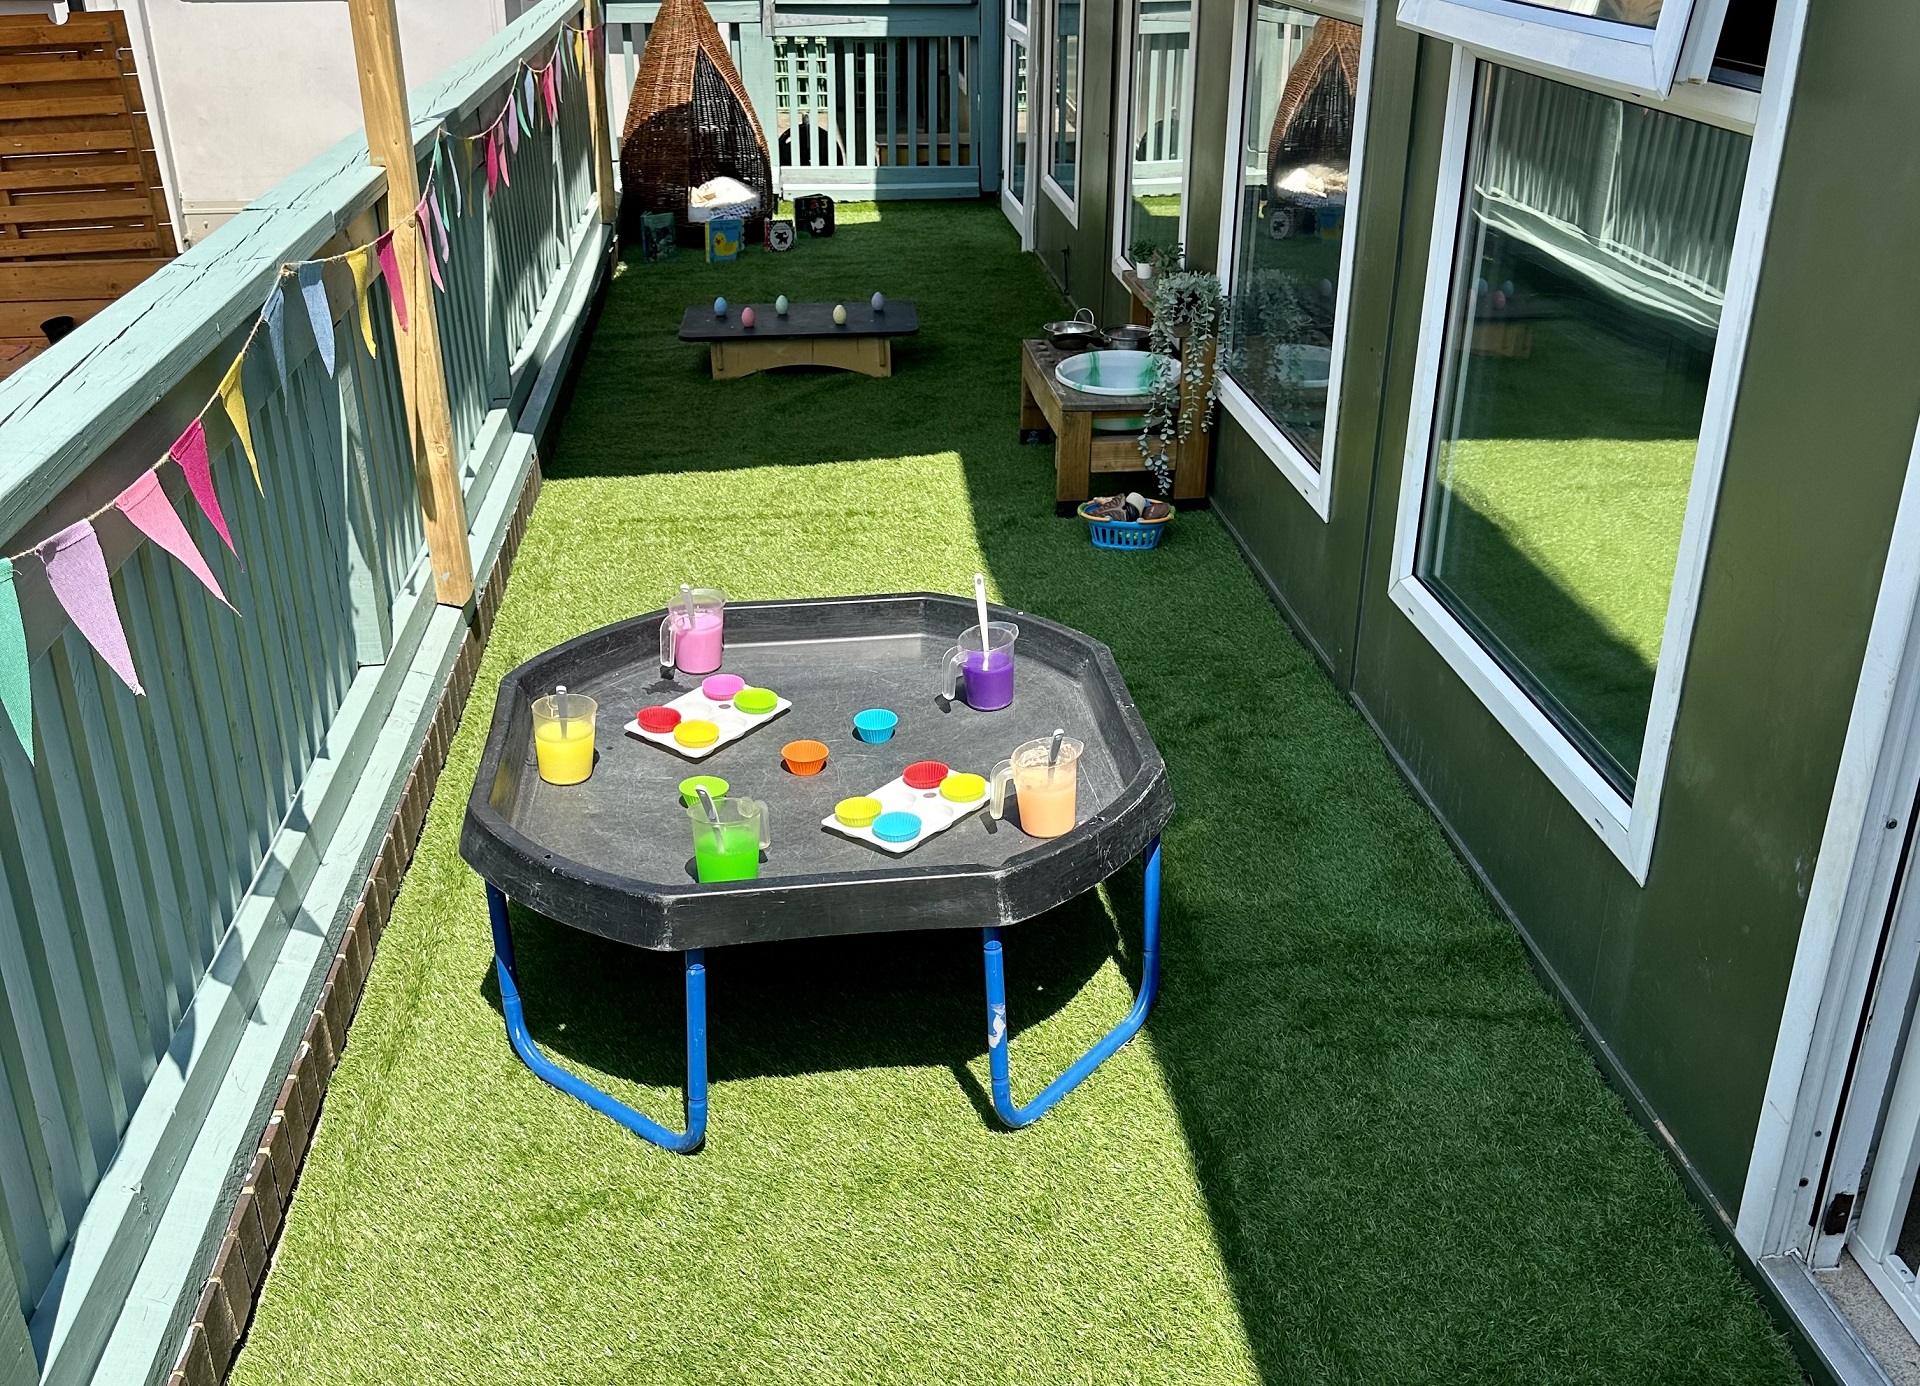 Bright Horizons Guildford Day Nursery patio